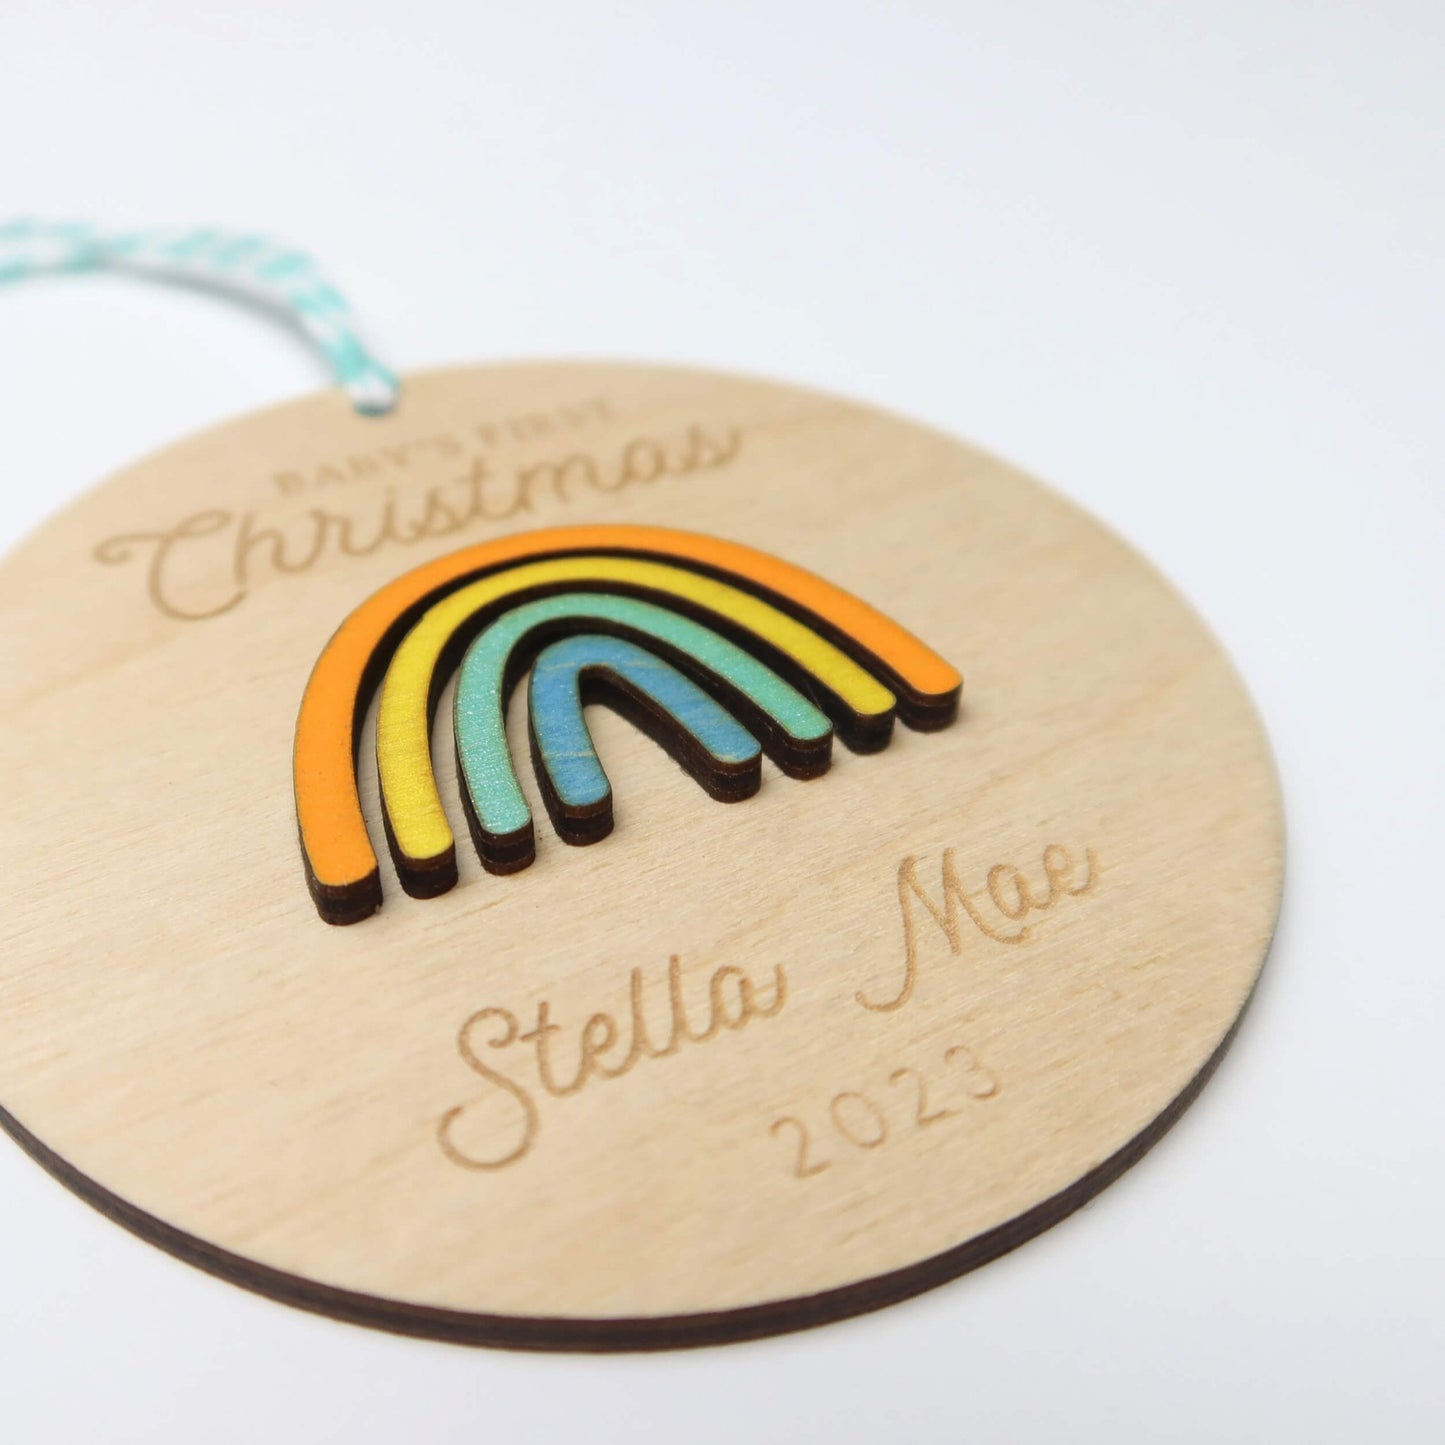 Rainbow Baby's First Christmas Ornament Personalized - Holiday Ornaments - Moon Rock Prints